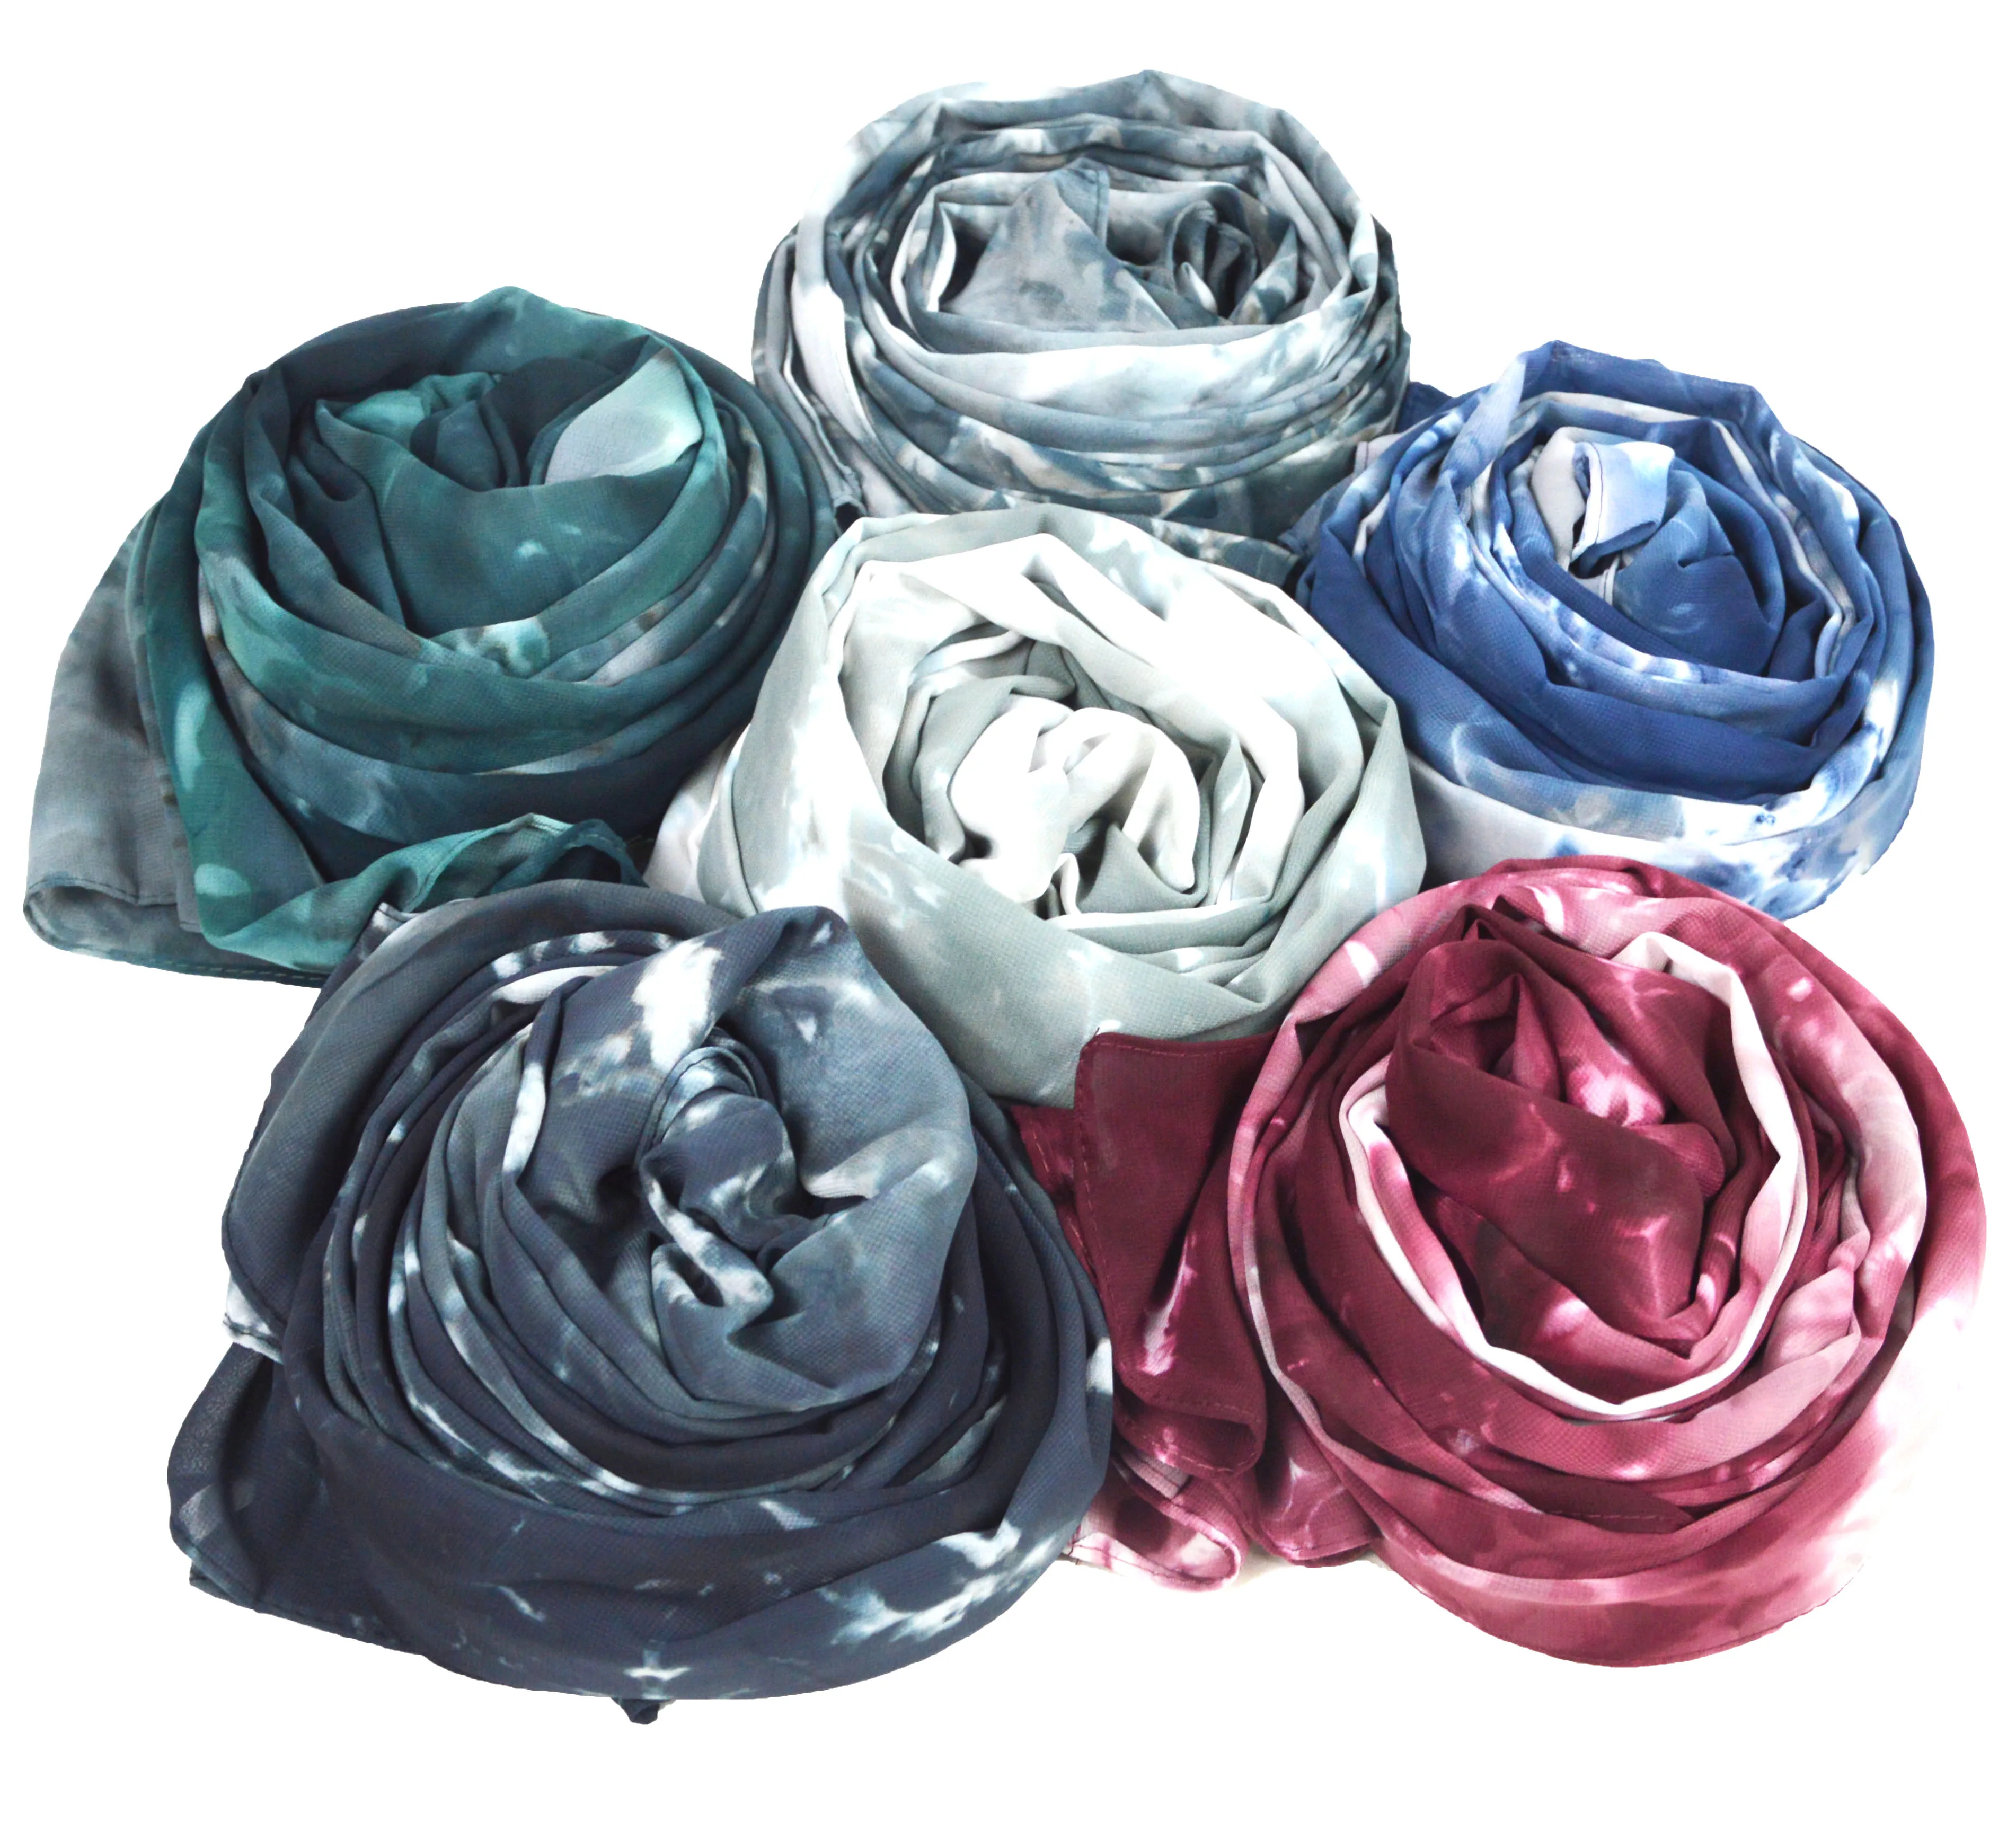 G40 20pcs New Arrival Ombre Tie-dyed Chiffon Scarf Hijabs Printed Shawls Women Large Size Muslim Headscarf Wraps